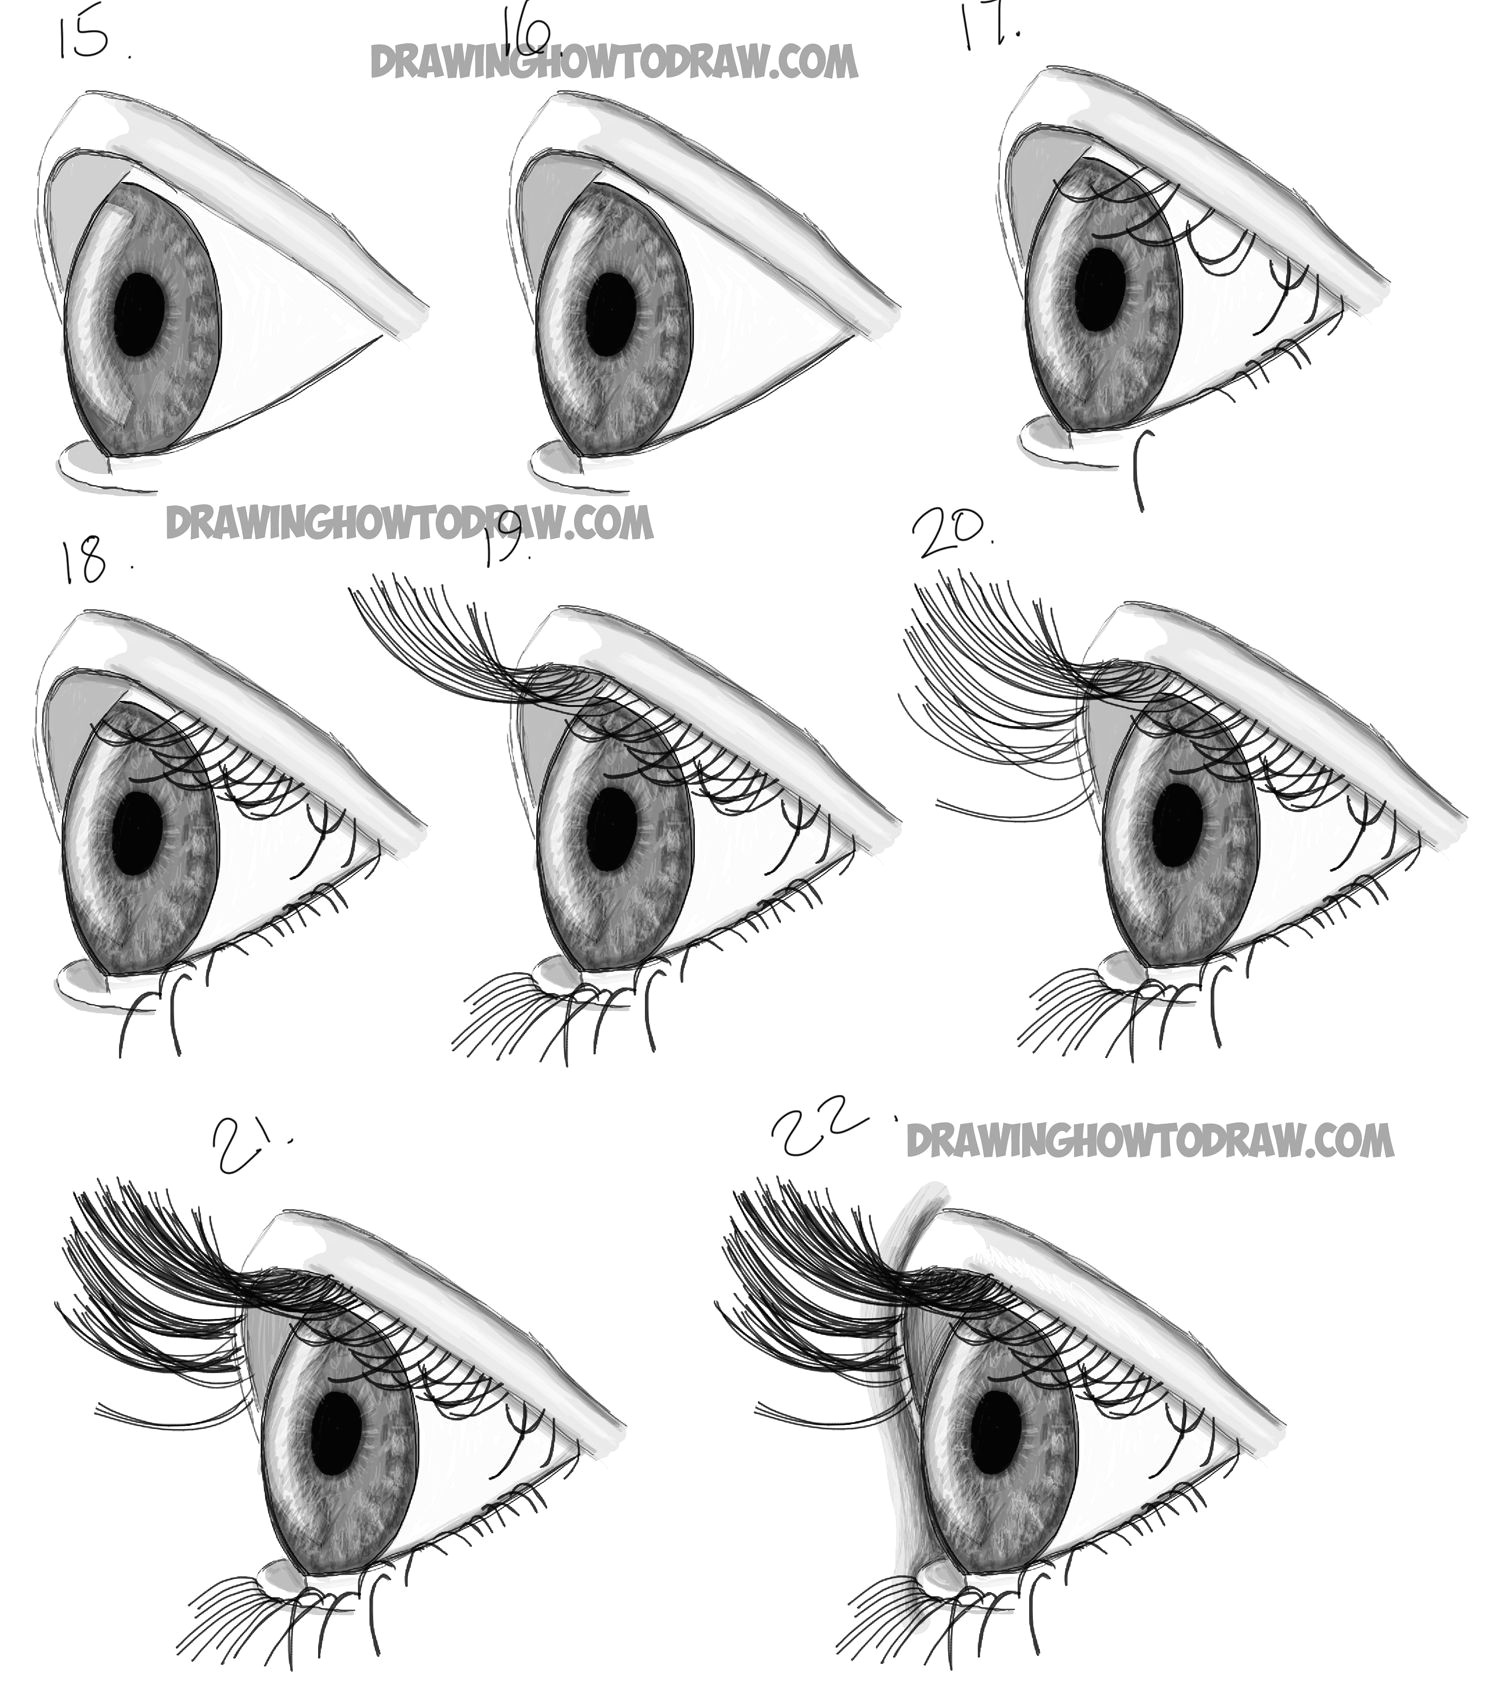 Drawing Eyes Side Profile How to Draw Realistic Eyes From the Side Profile View Step by Step